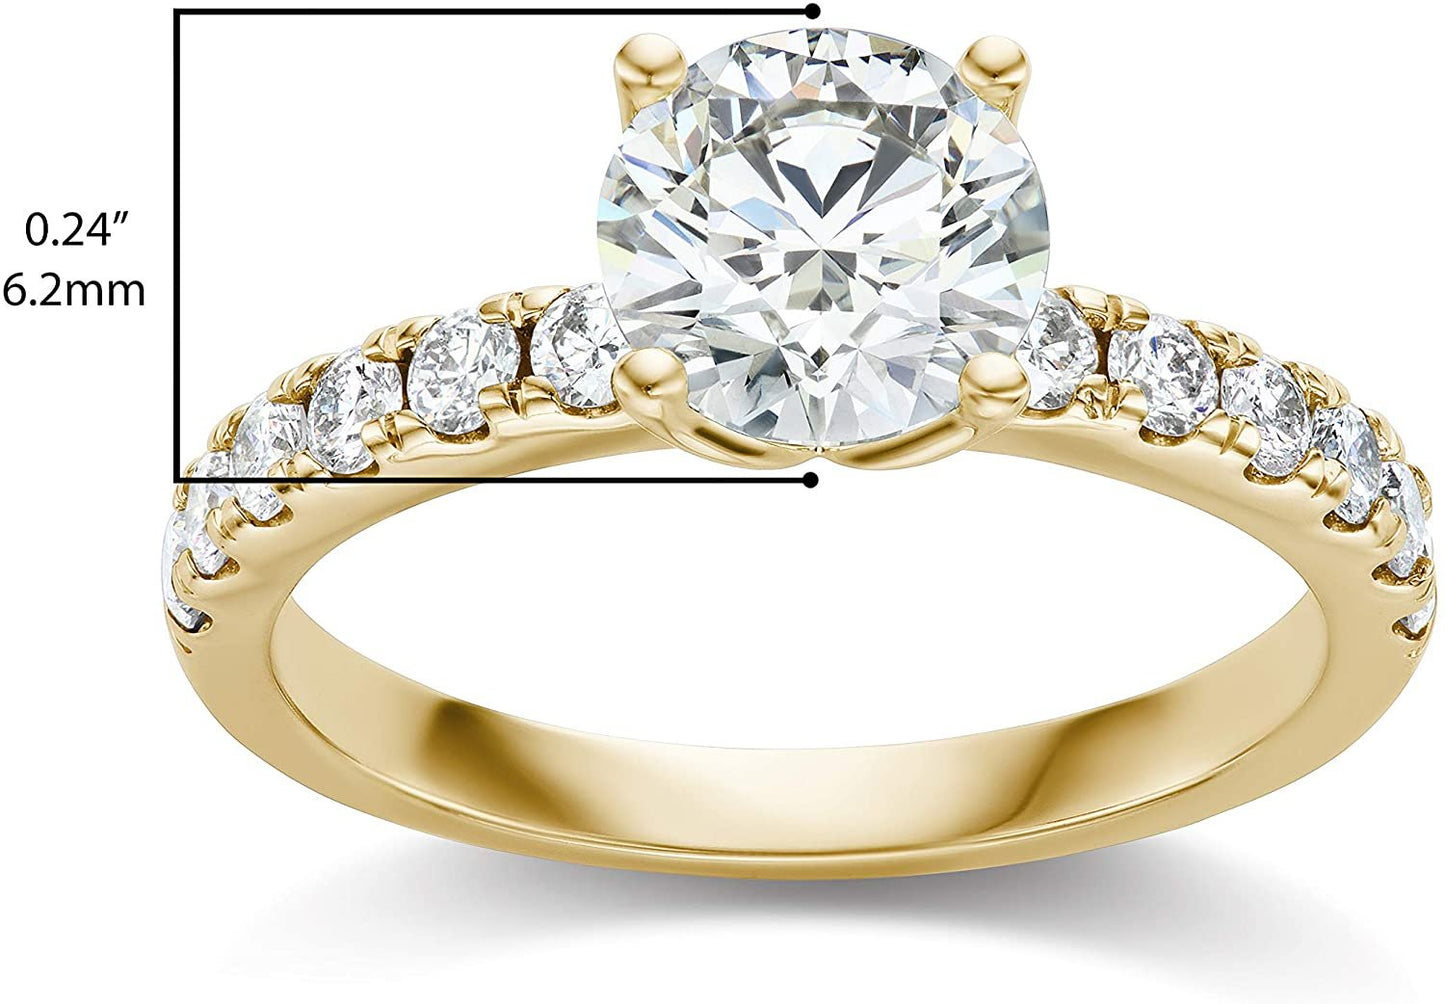 IGI Certified 14K Yellow Gold 1.0+ Cttw Brilliant-Cut Lab Created Diamond Solitaire Engagement Ring with Pavé-Set Band (9/10 Carat Center: I-J Color, VS1-VS2 Clarity) - Size 7-3/4